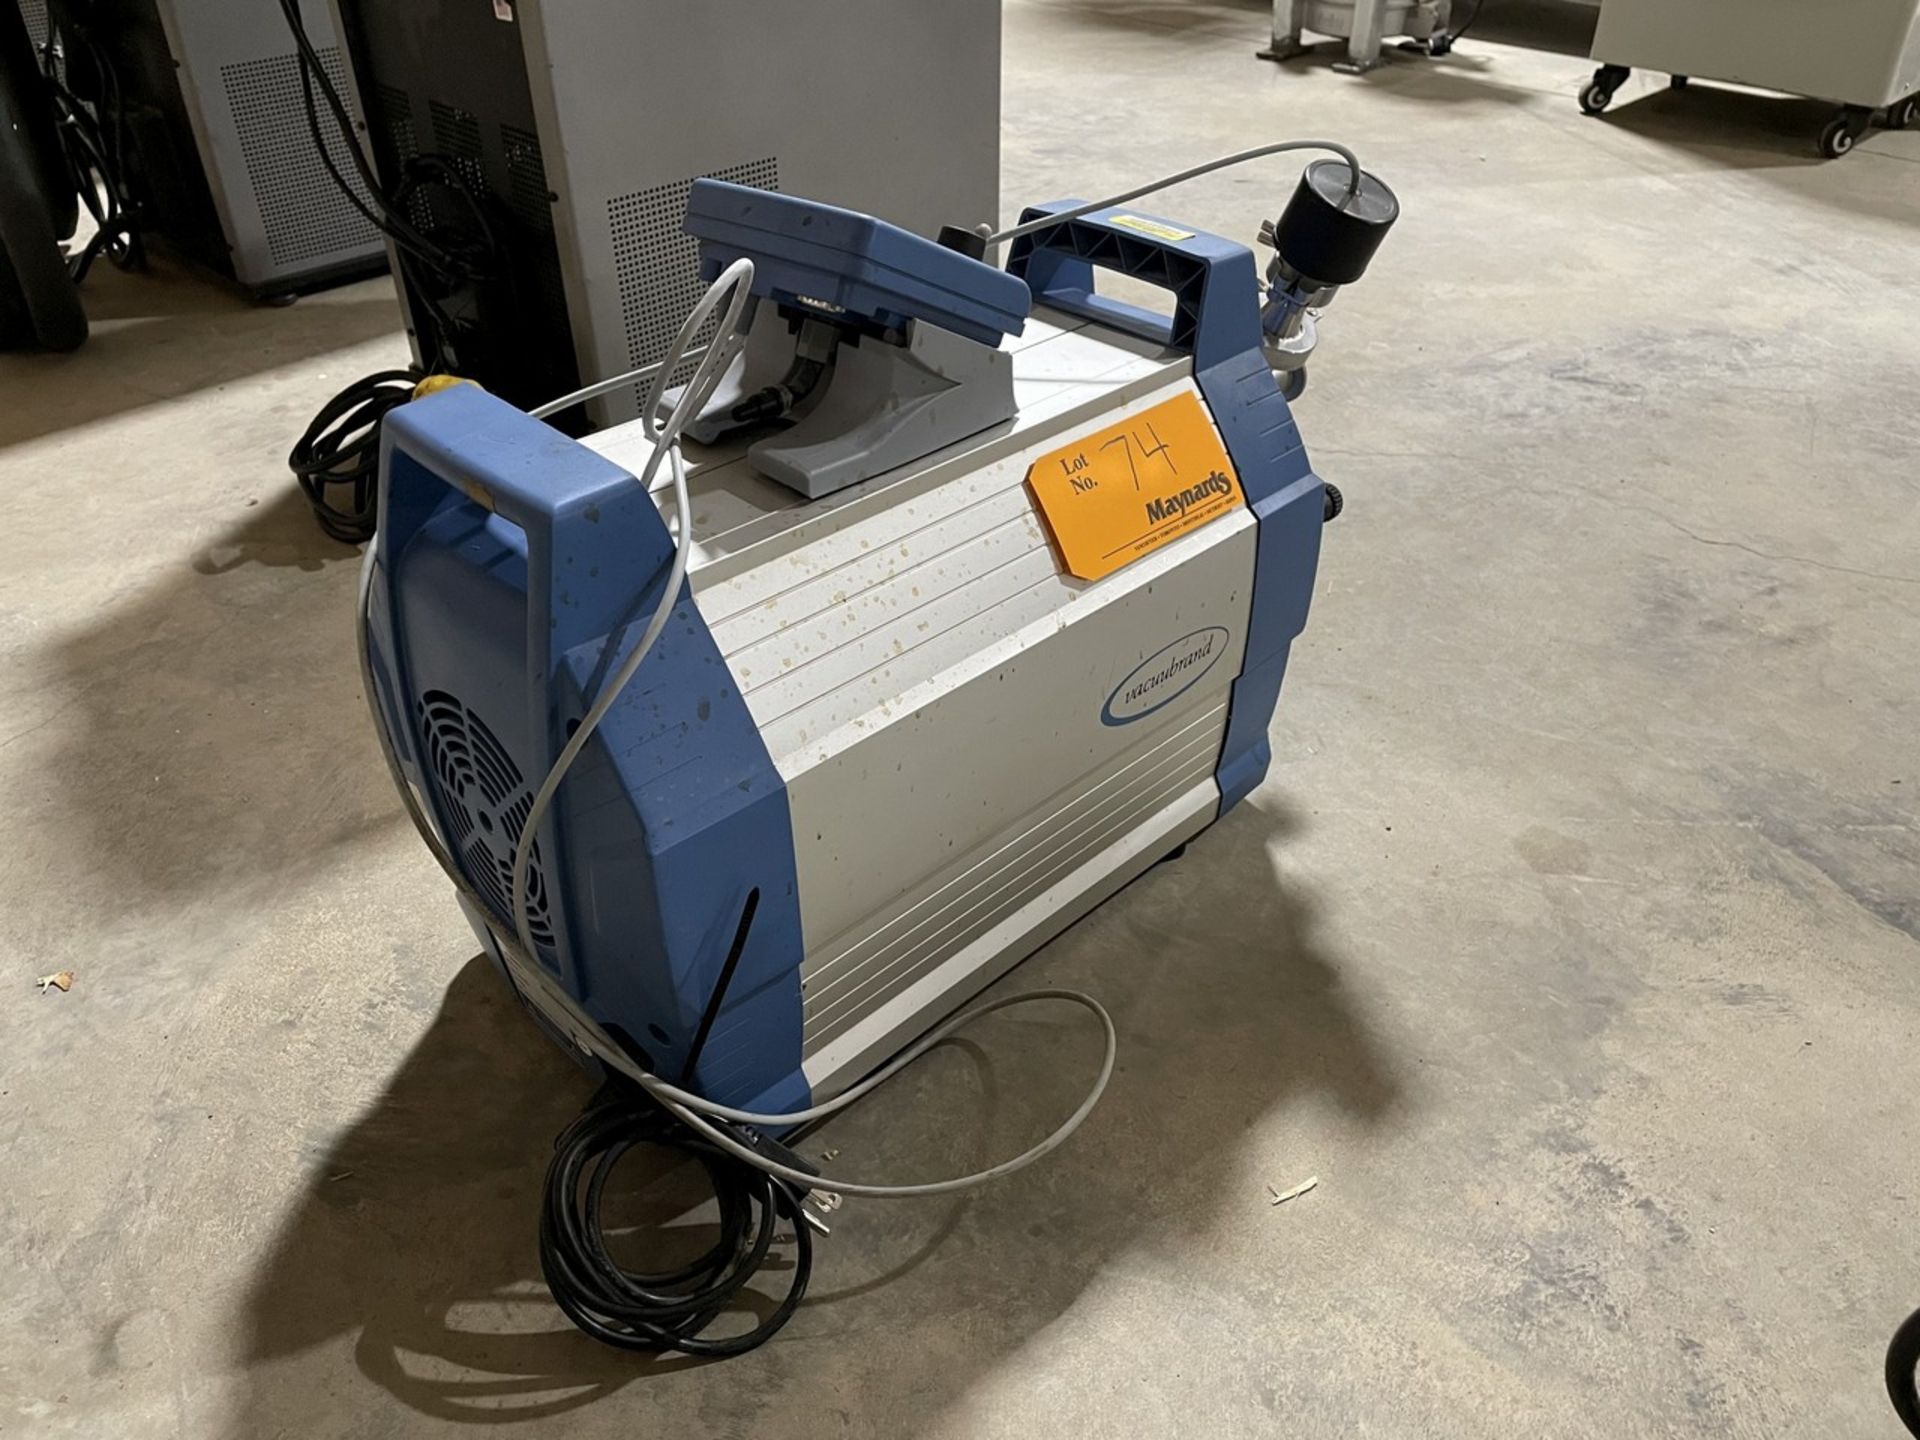 2018 Vacuubrand PC 3012 NT VARIO Chemistry Pumping Unit - Image 4 of 5